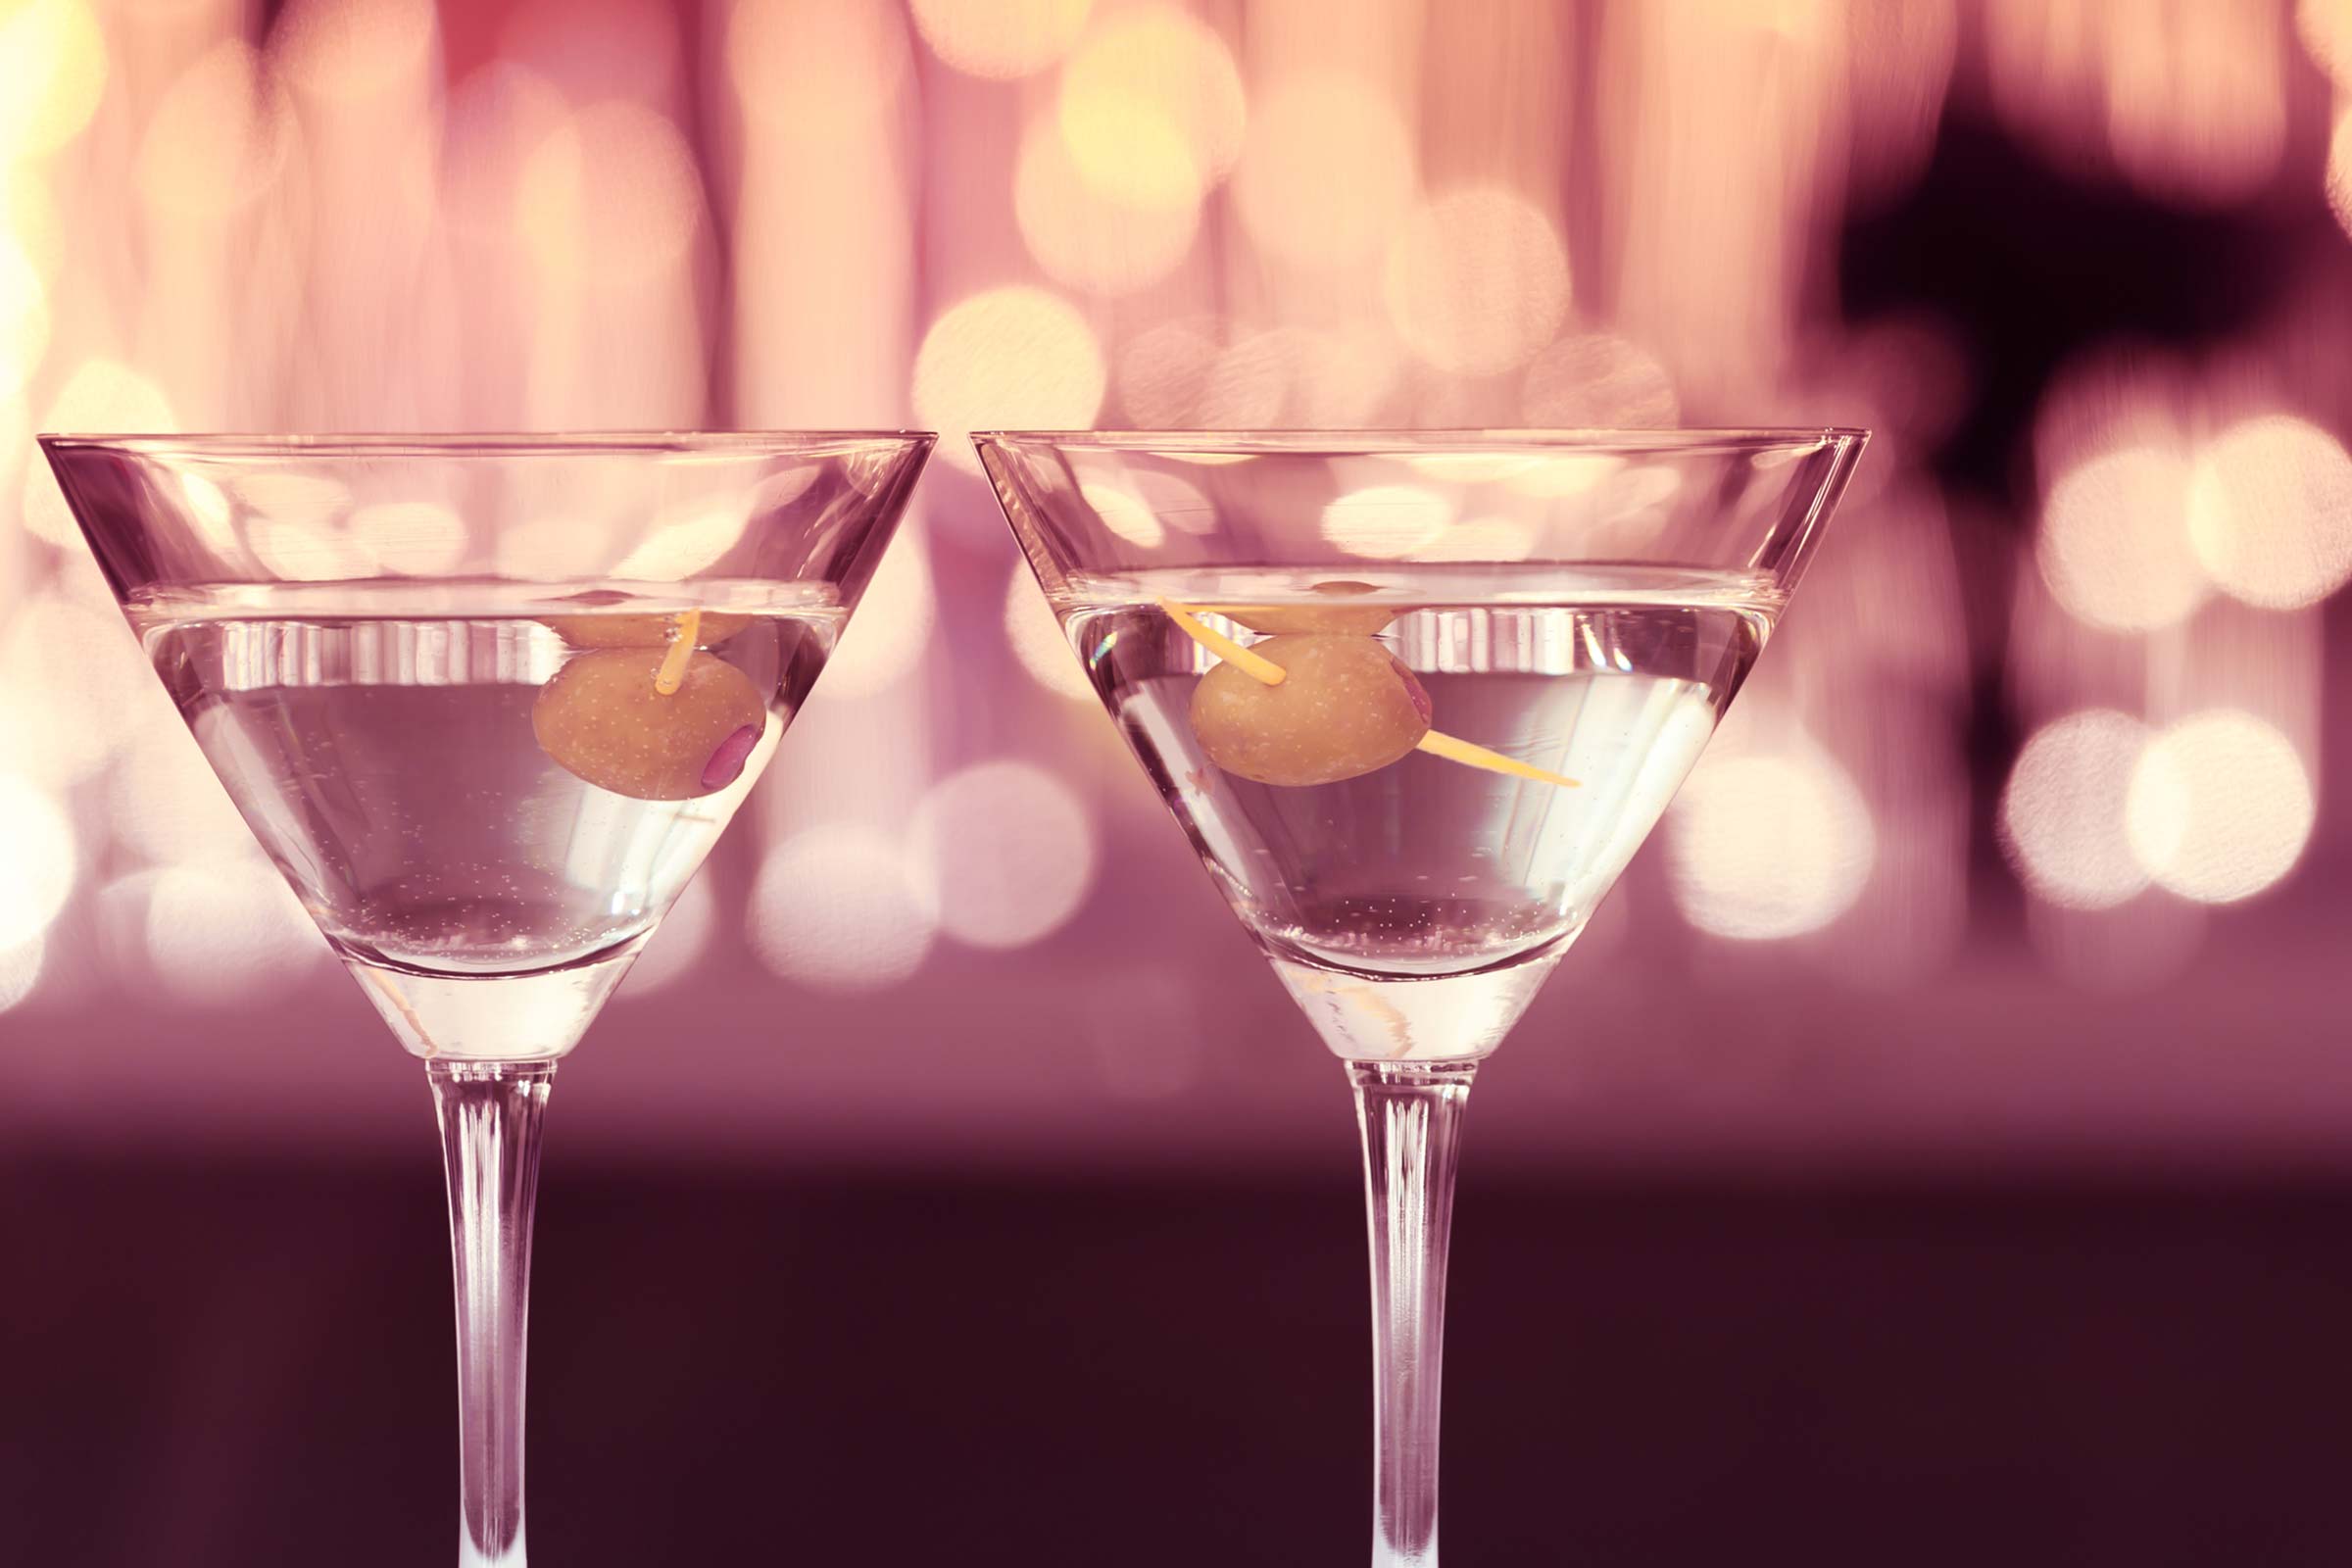 When Exactly Do You Stir vs. Shake a Drink? | Reader's Digest